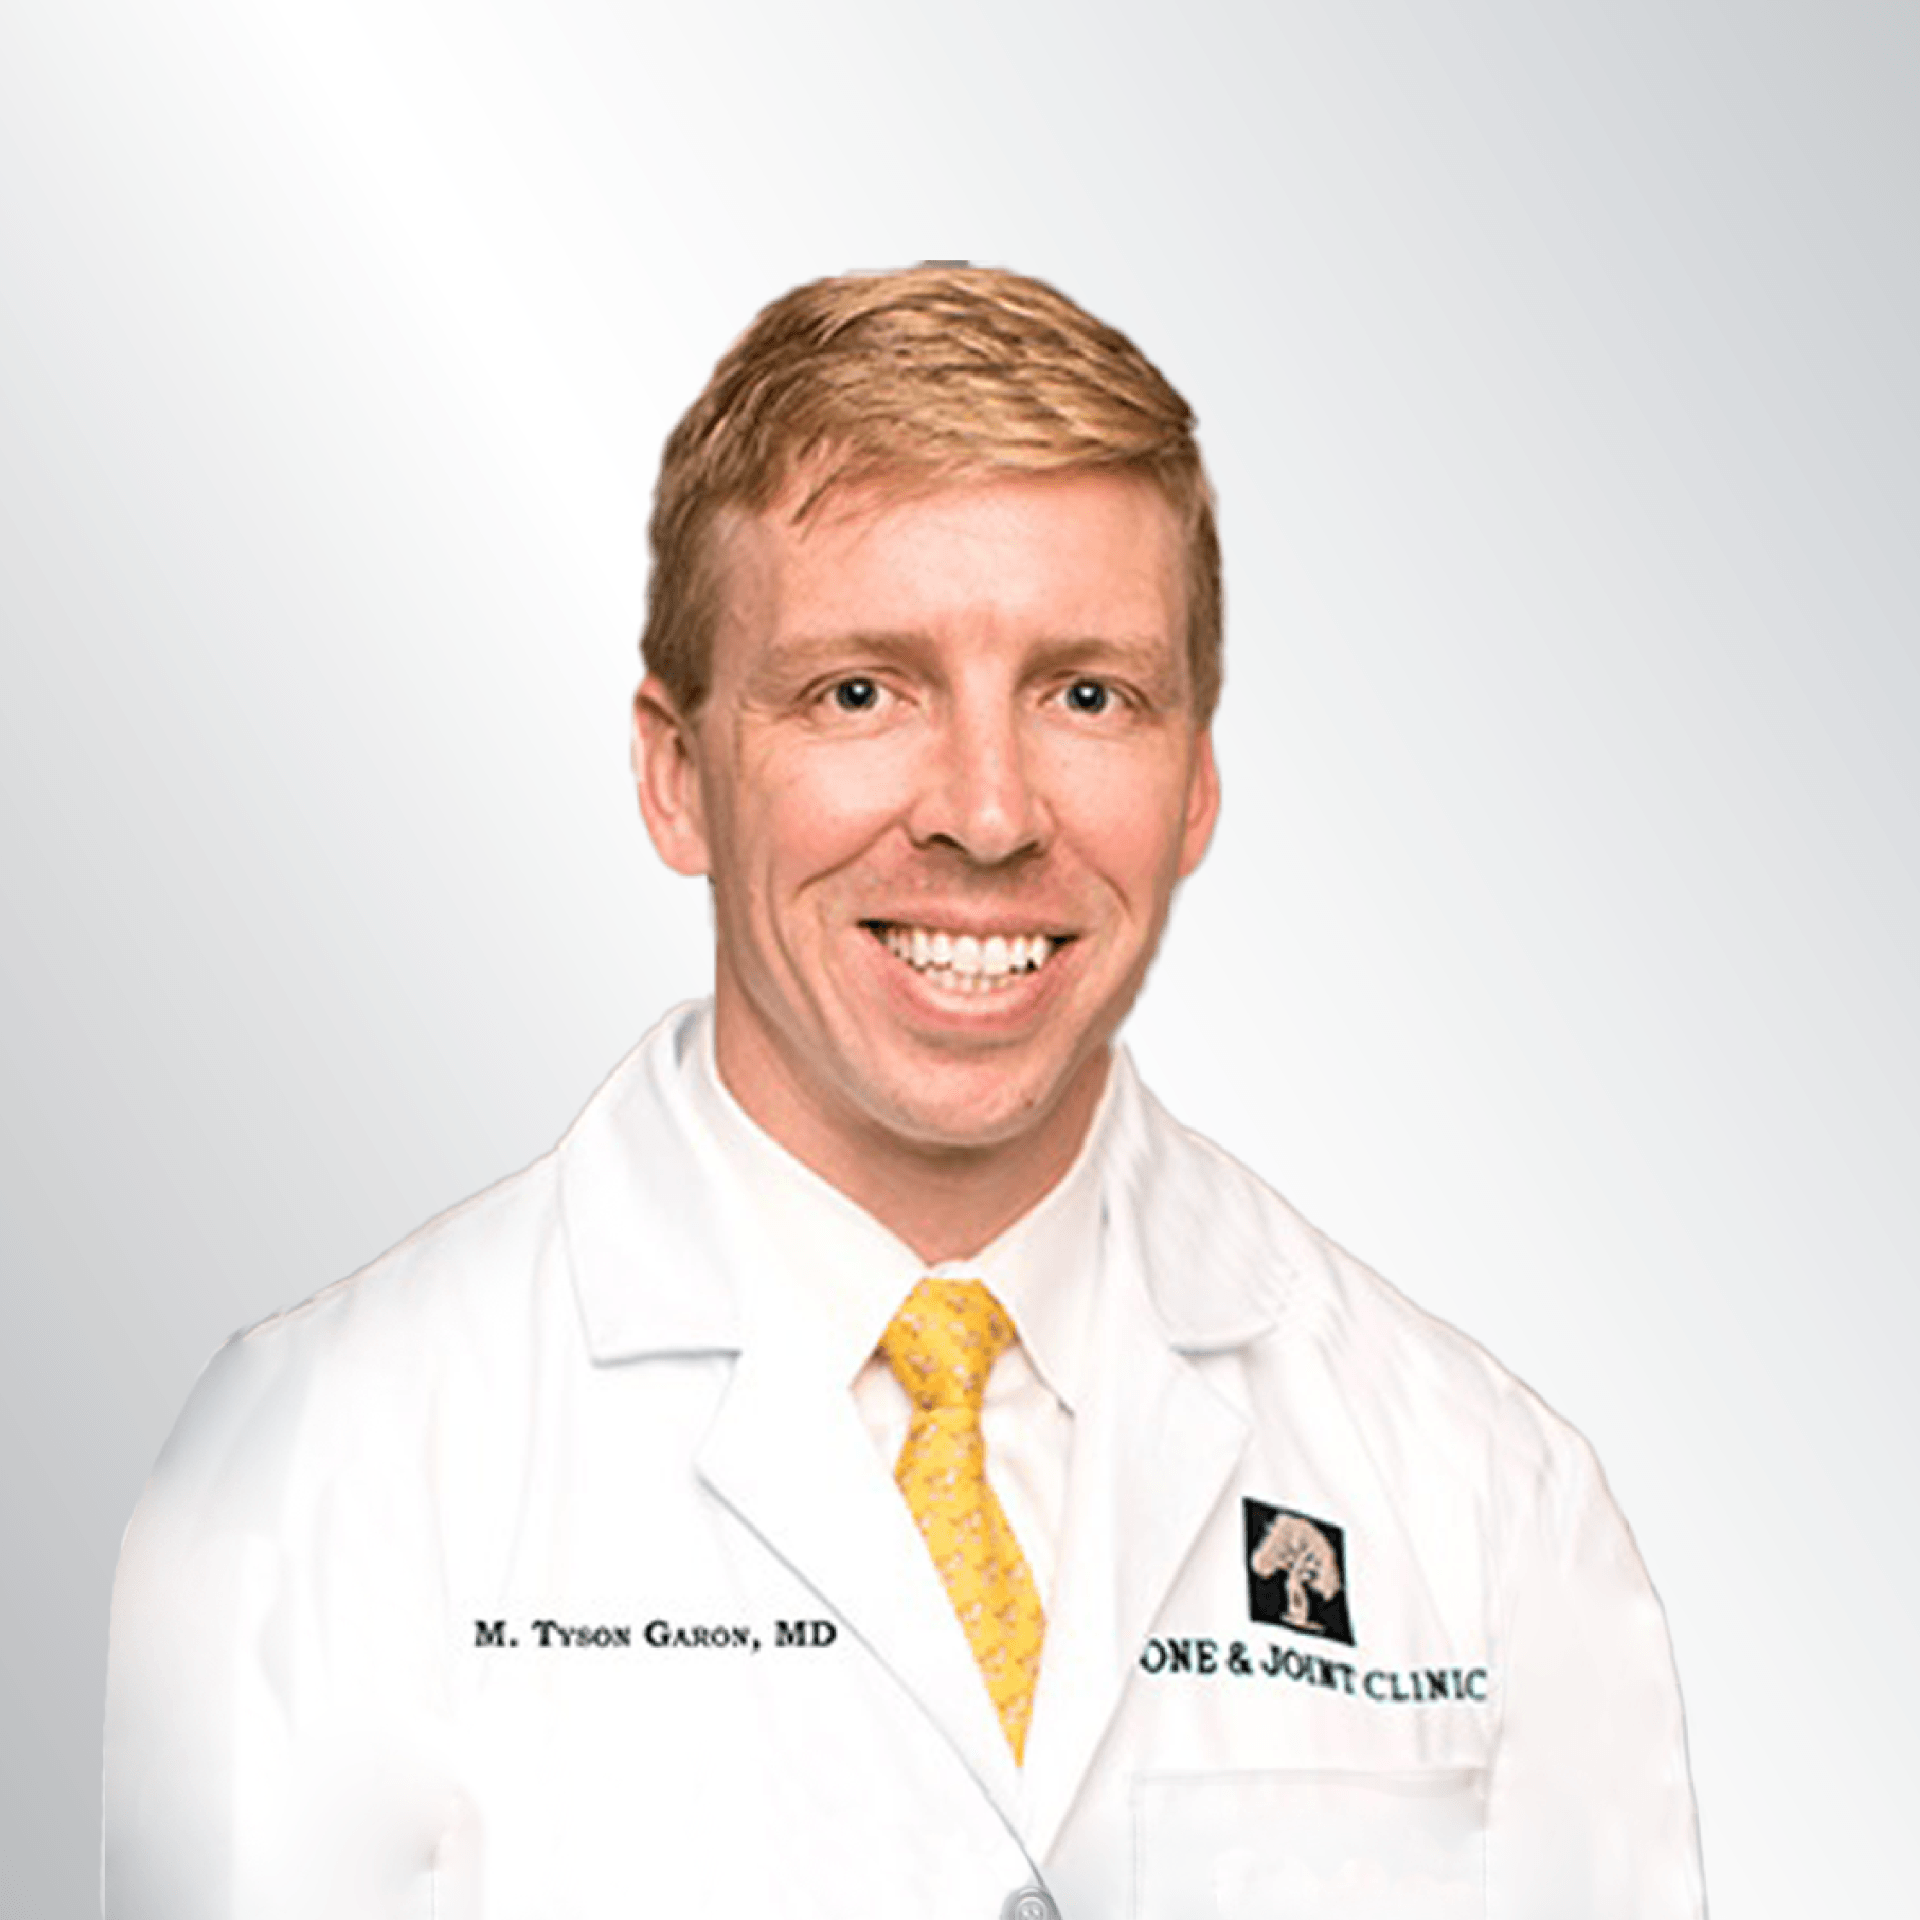 The Bone and Joint Clinic Announces Dr. Garon's Expansion to St. Francisville at The Daniel Clinic